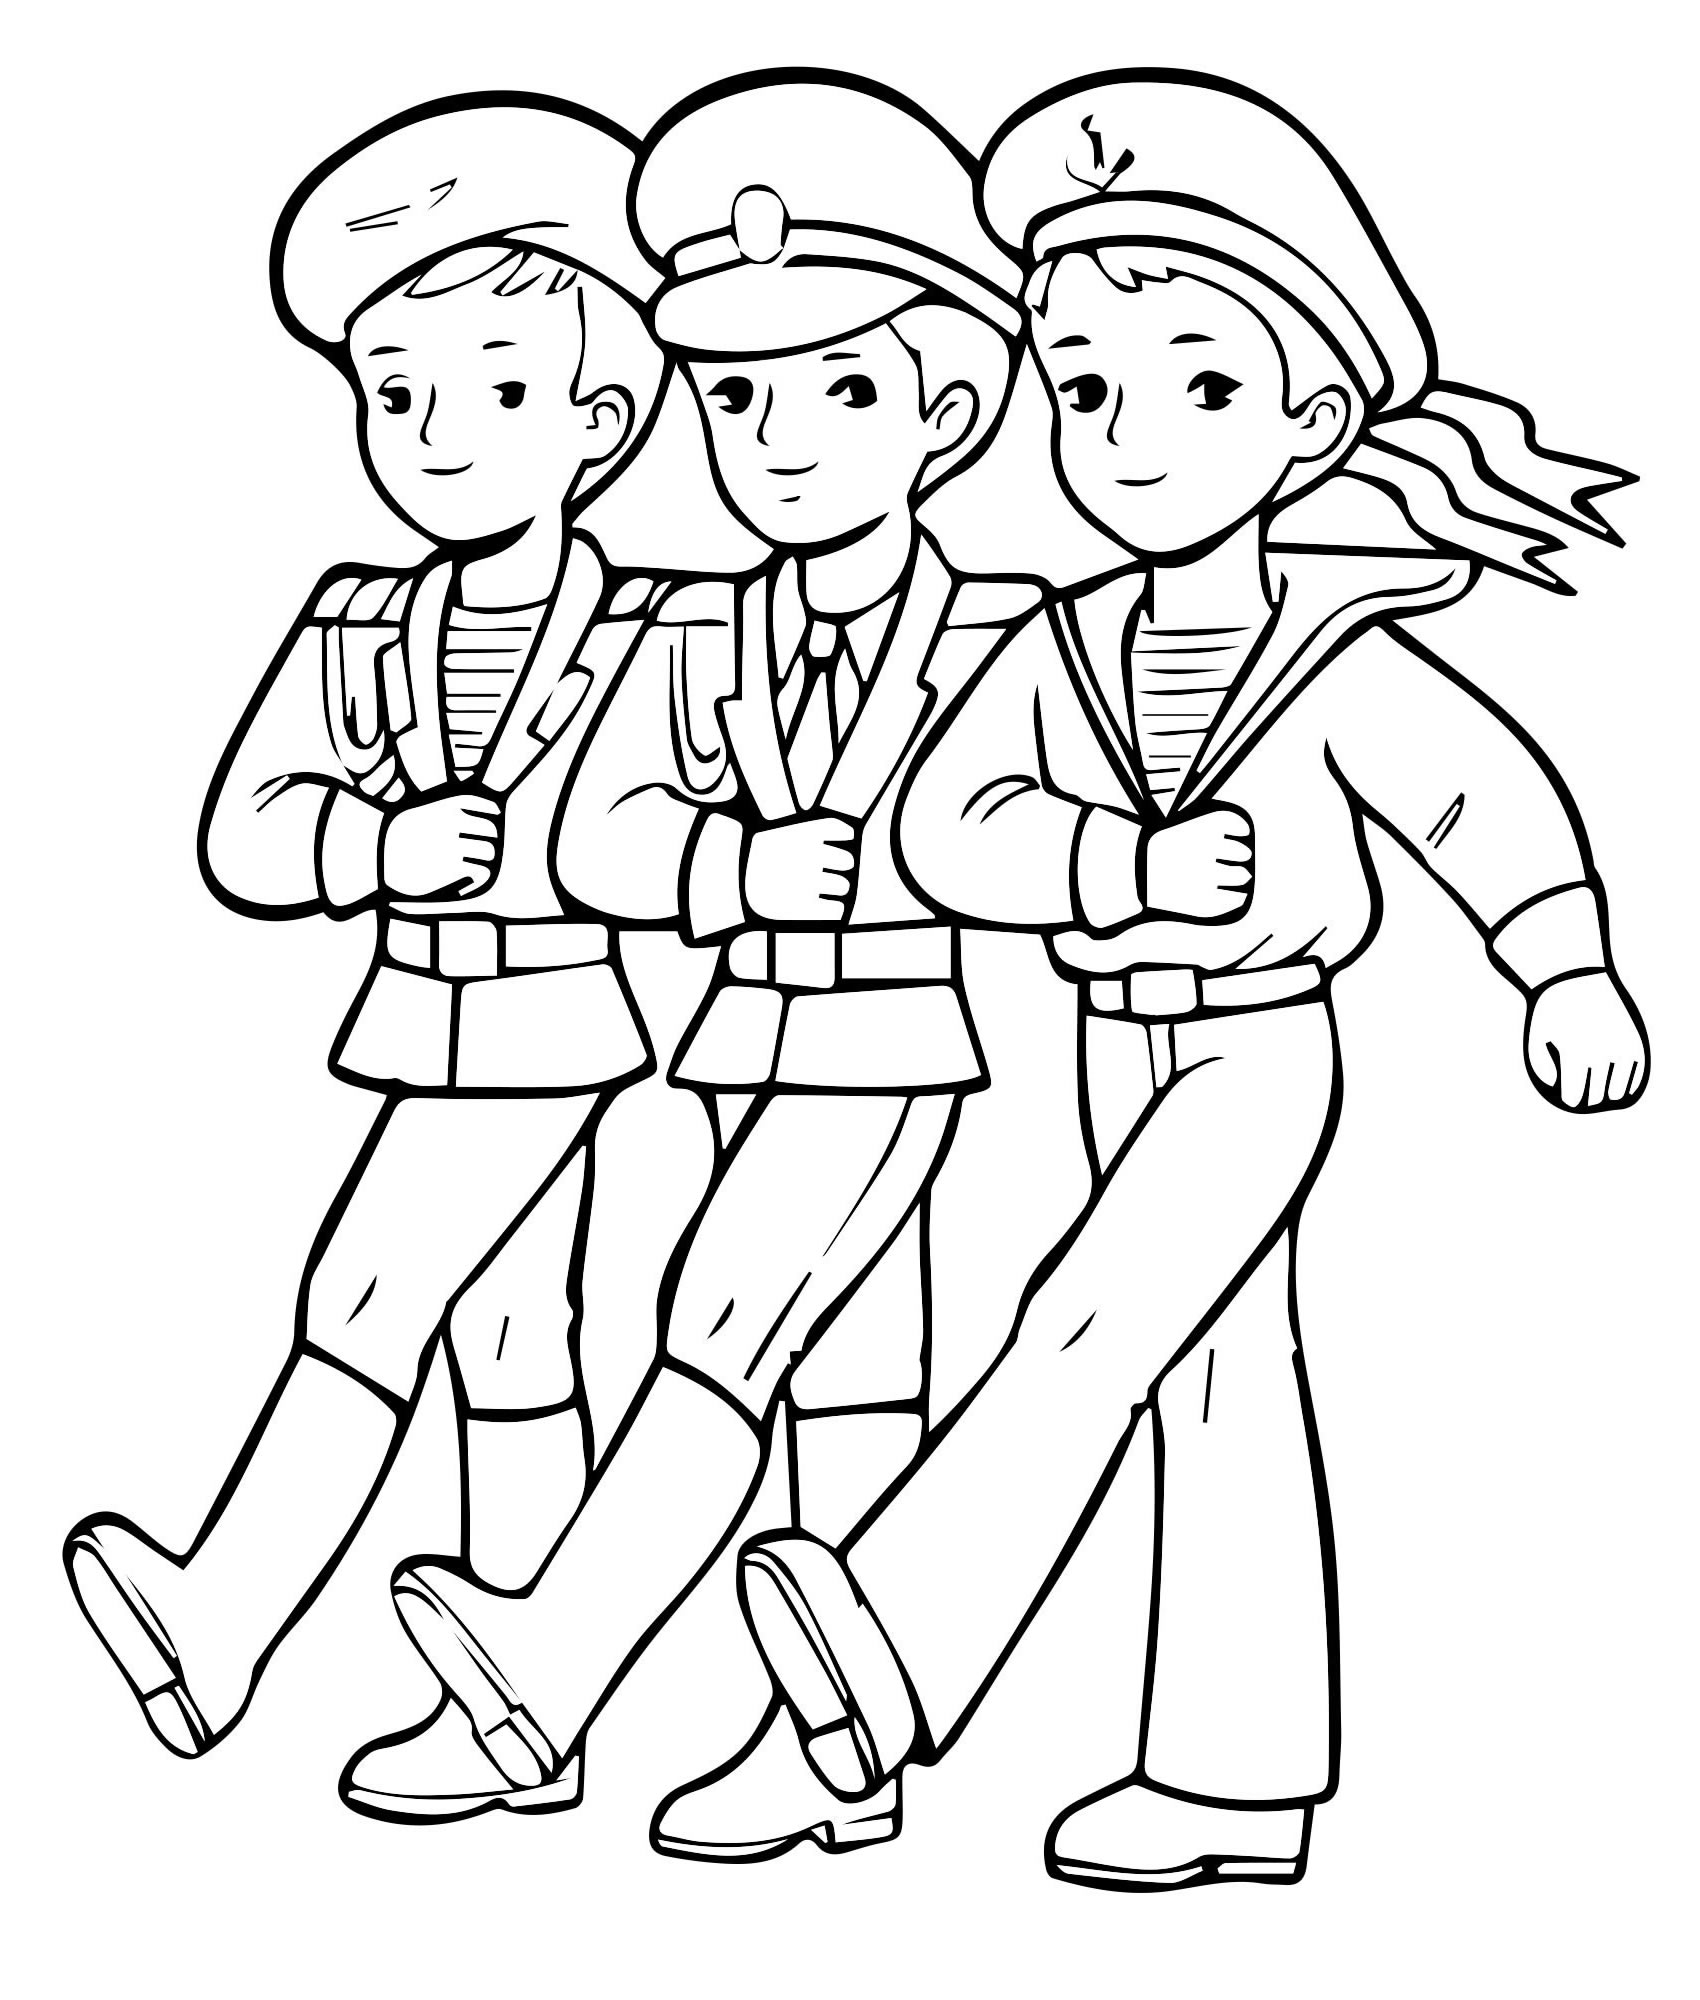 Heroic soldier and children's coloring book